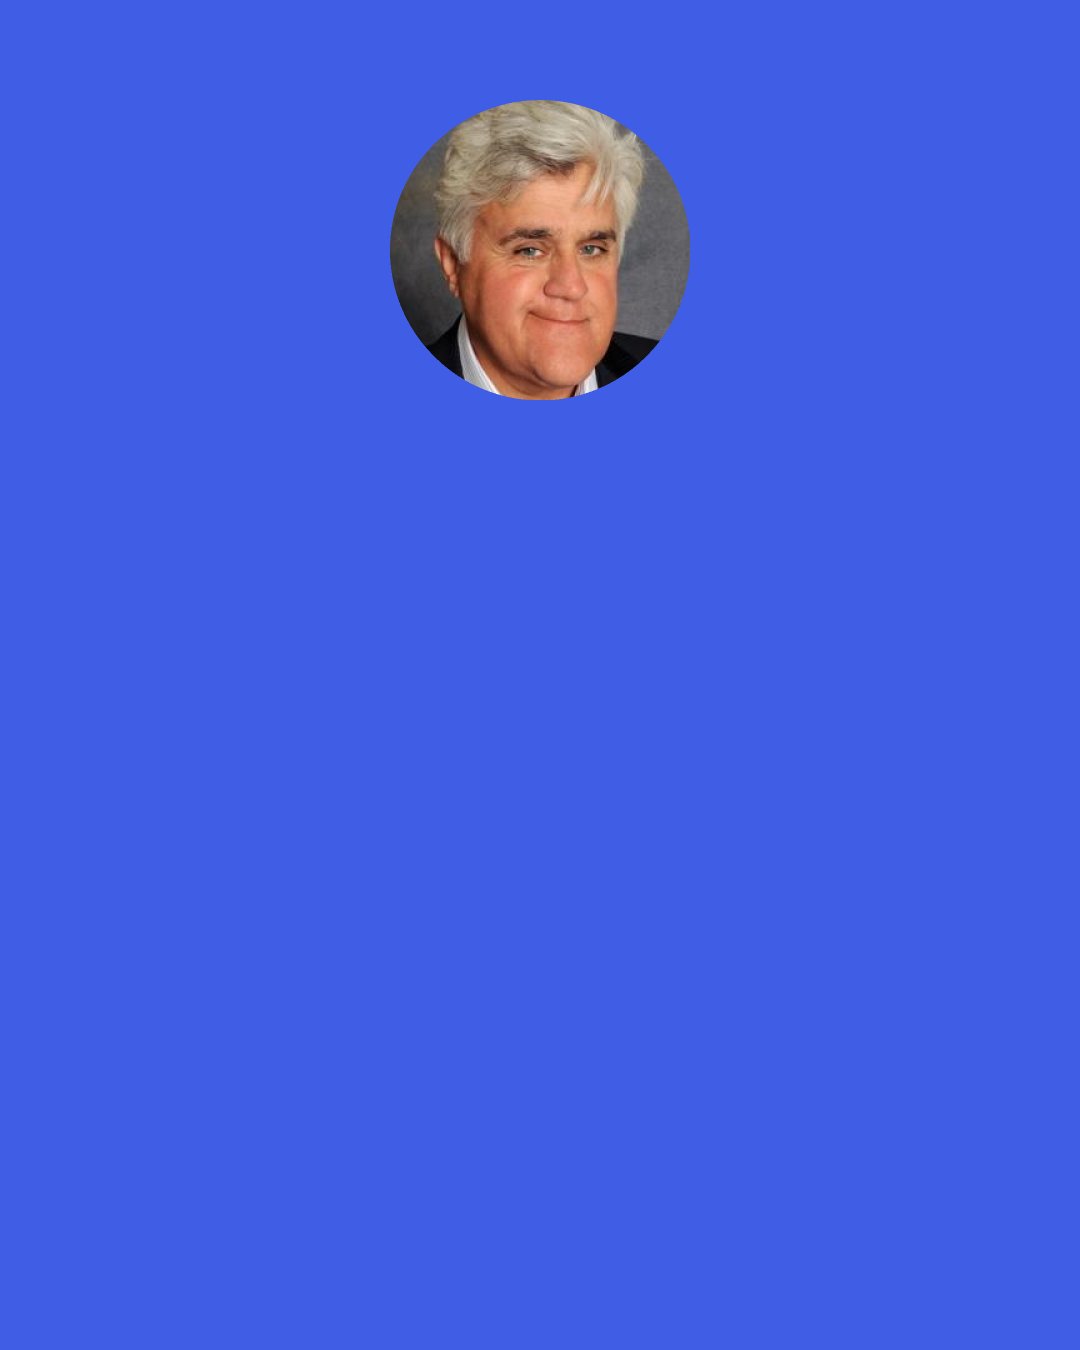 Jay Leno: Show business pays you a lot of money, because eventually you’re gonna get screwed.